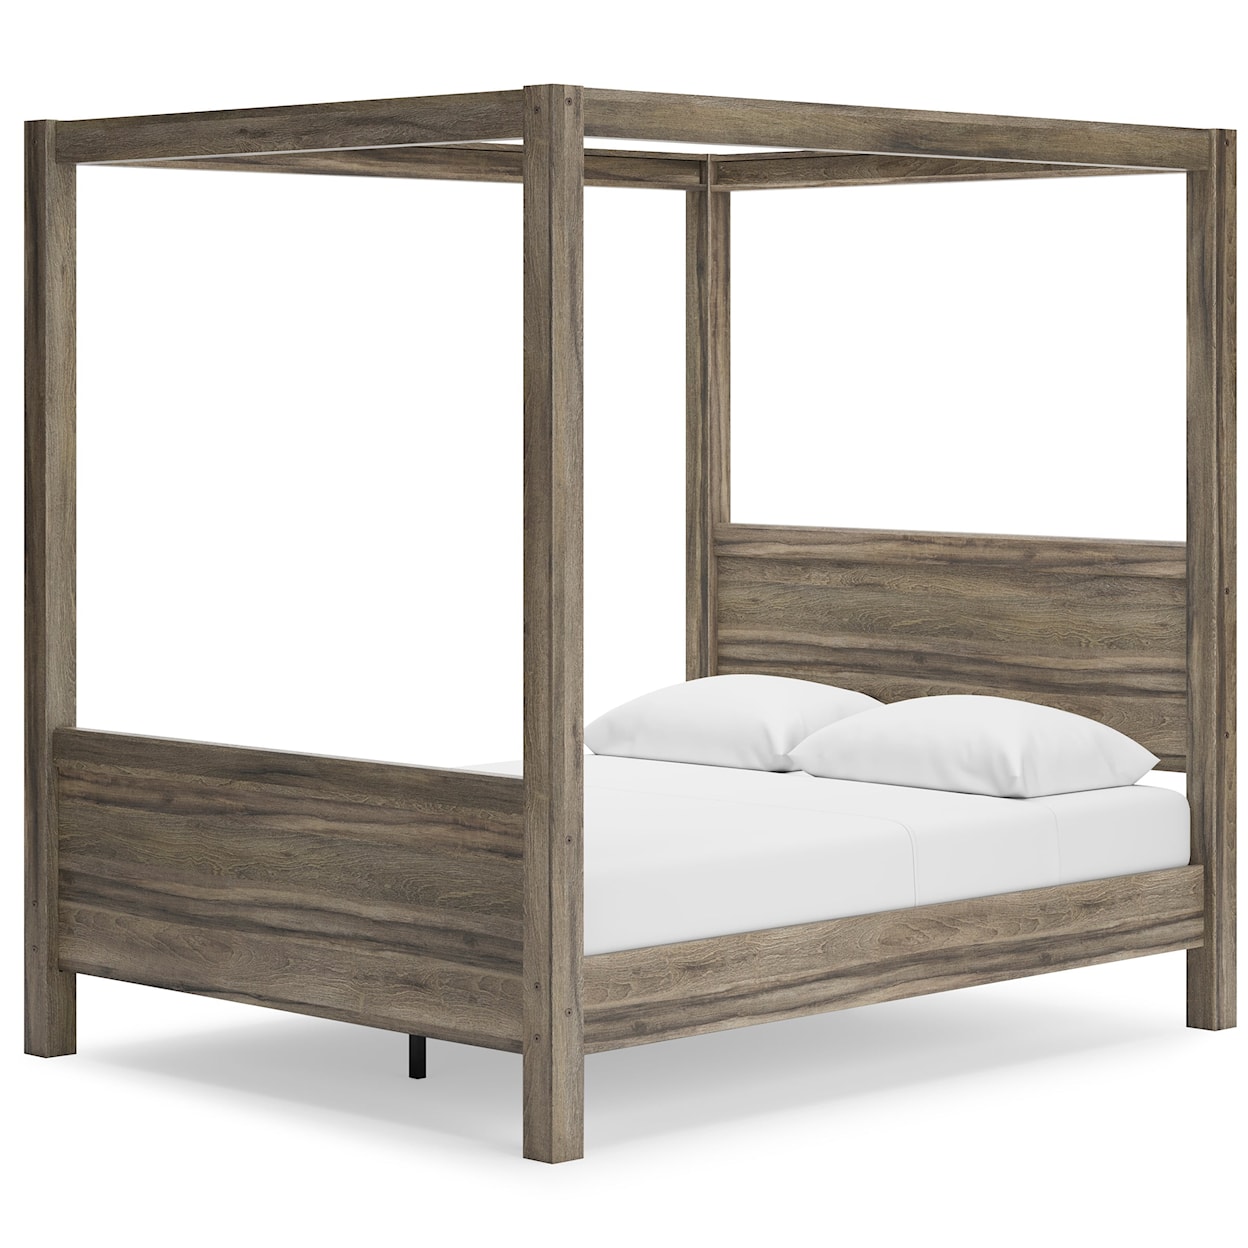 Benchcraft Shallifer Queen Canopy Bed